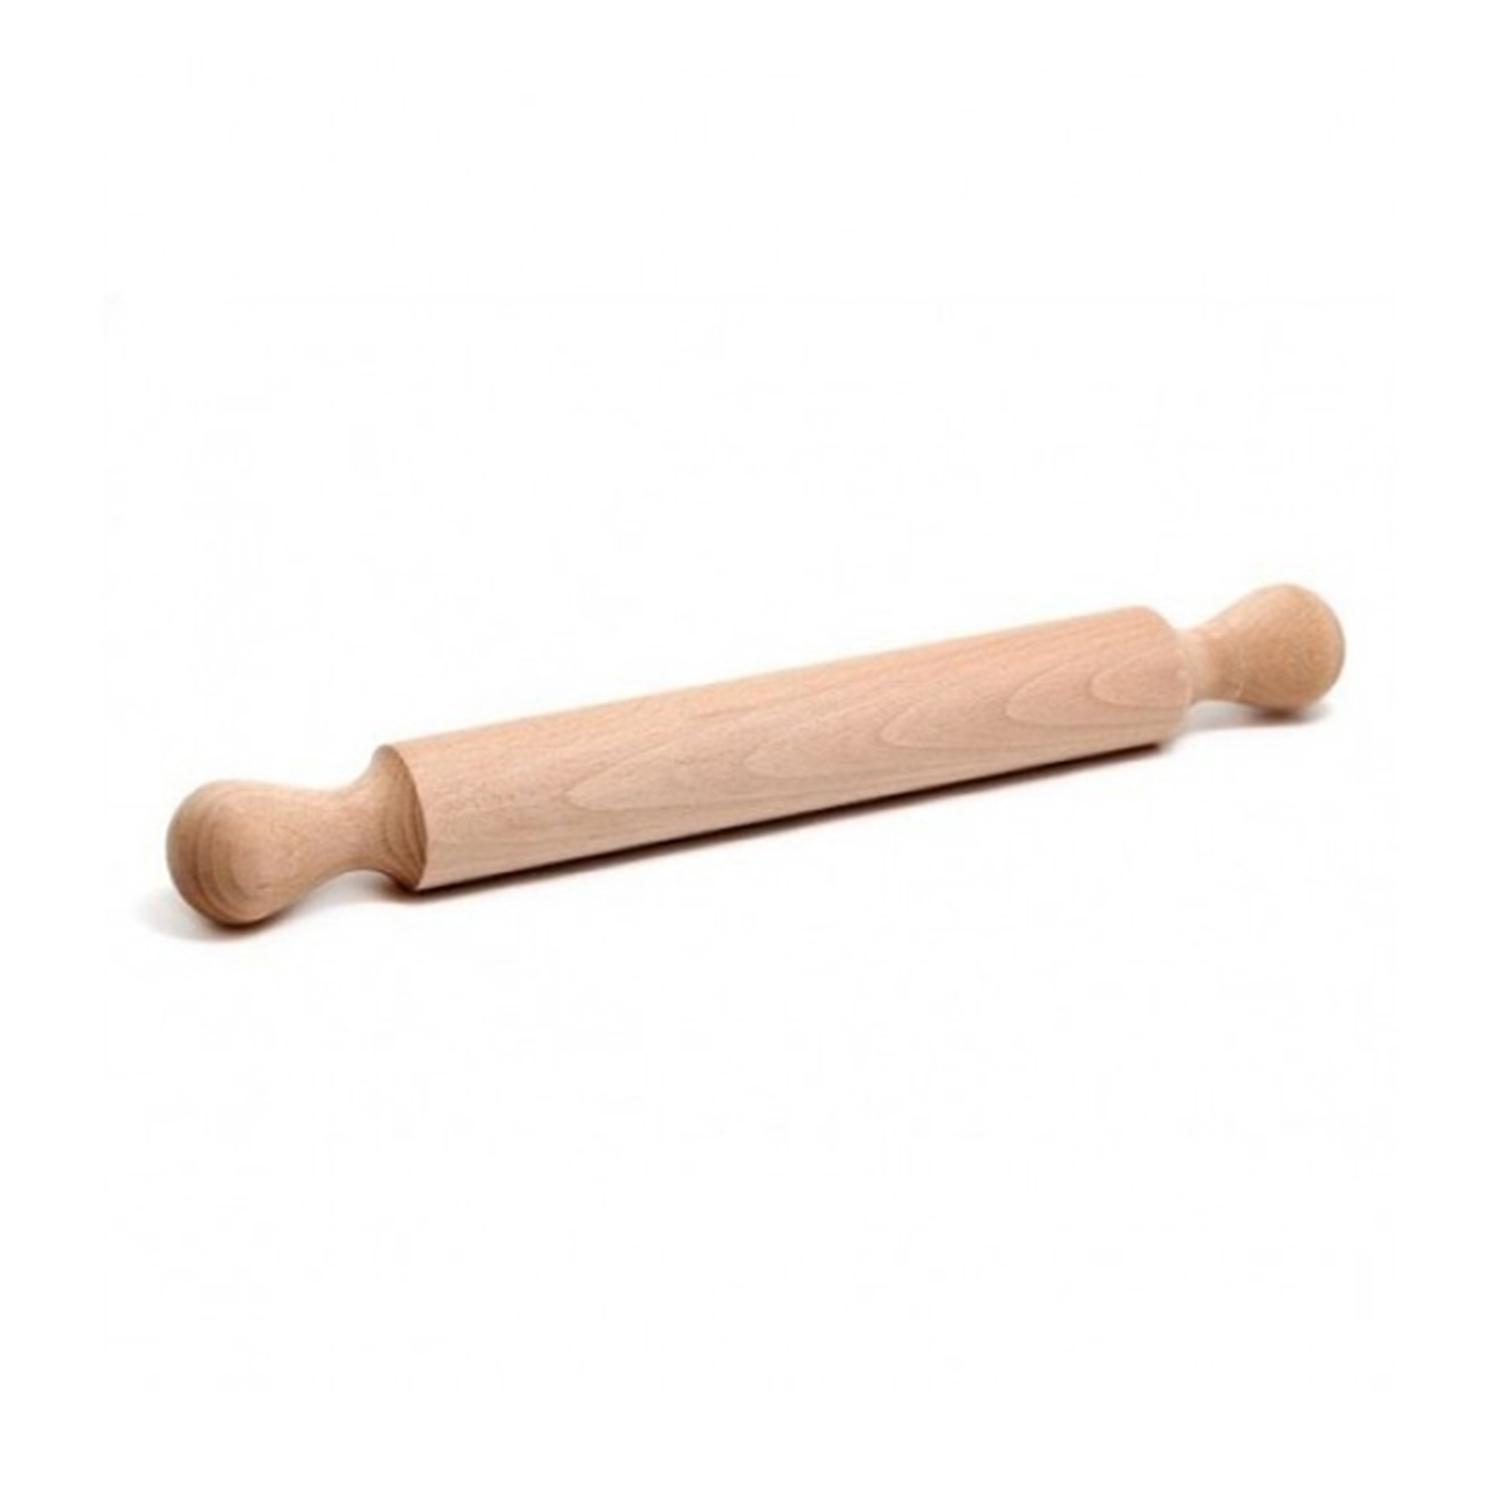 2X2X20 INCHES WOODEN ROLLING PIN PLAIN